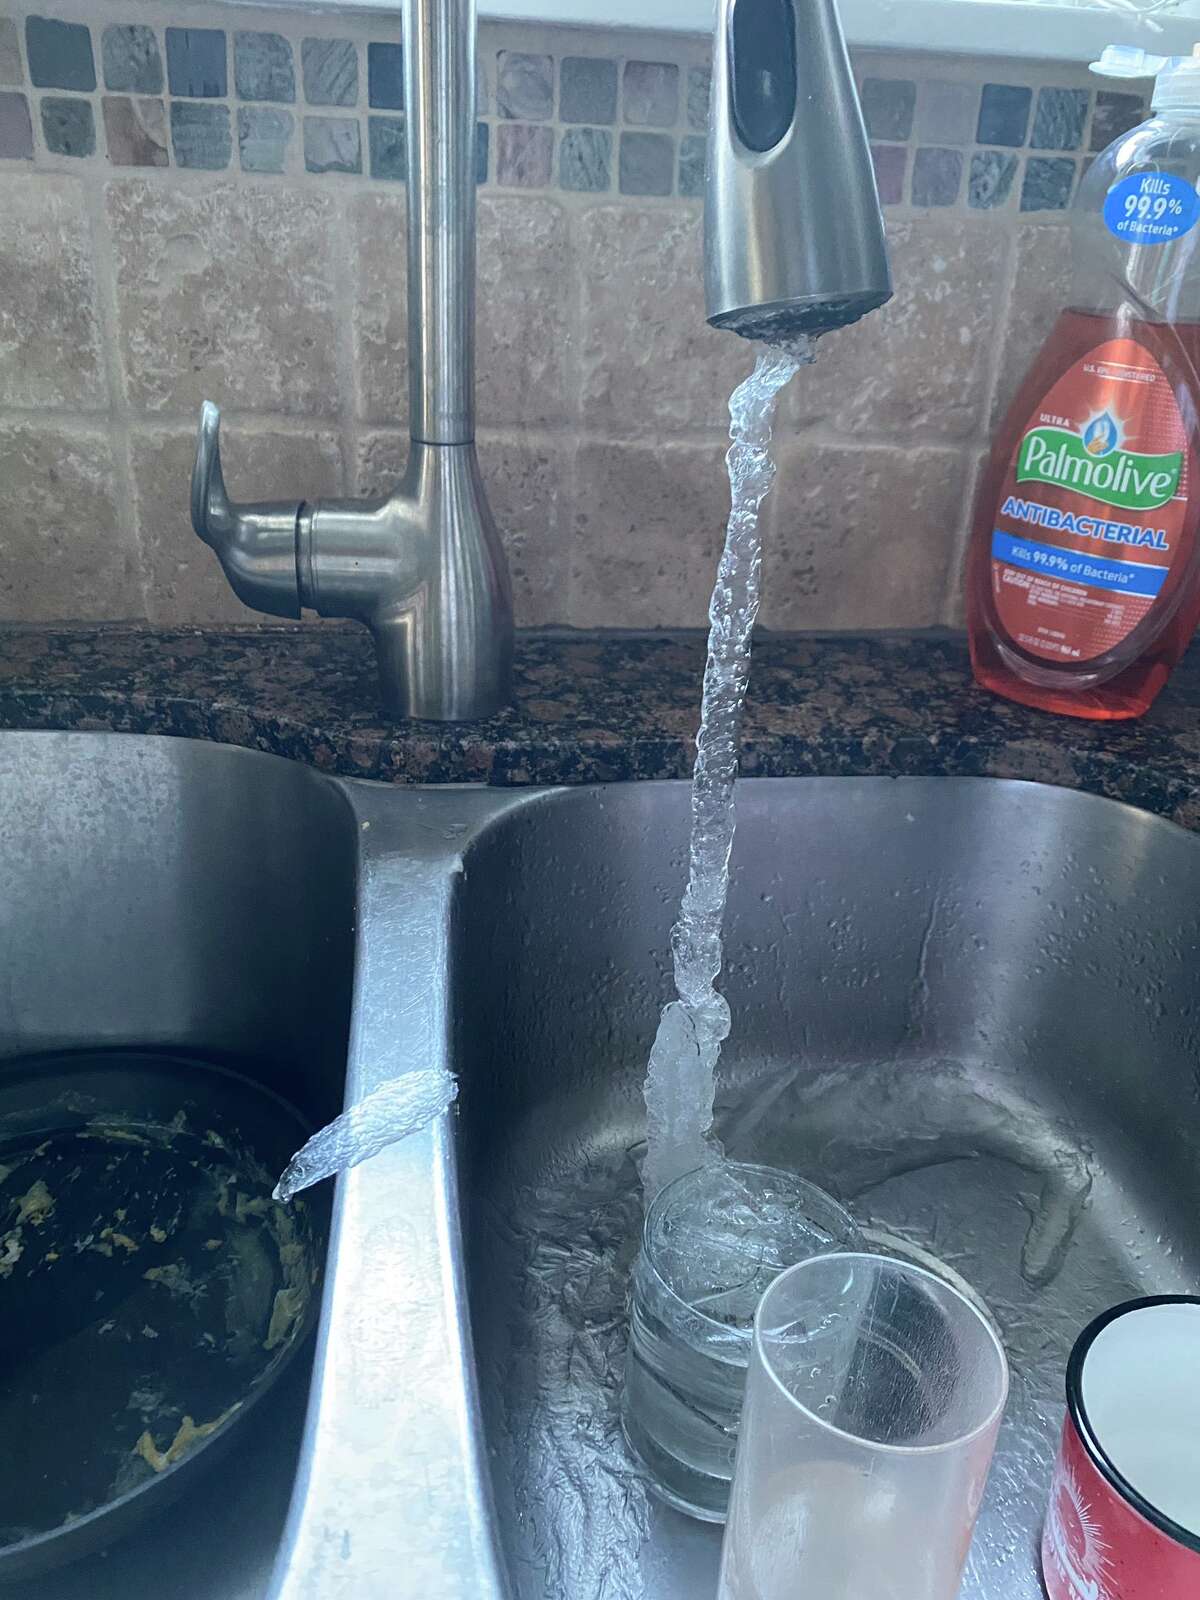 Heights-area resident Brooke Schuler shared this photo of her frozen water faucet on Tuesday morning, after she had lost power to her home and left her faucet dripping.